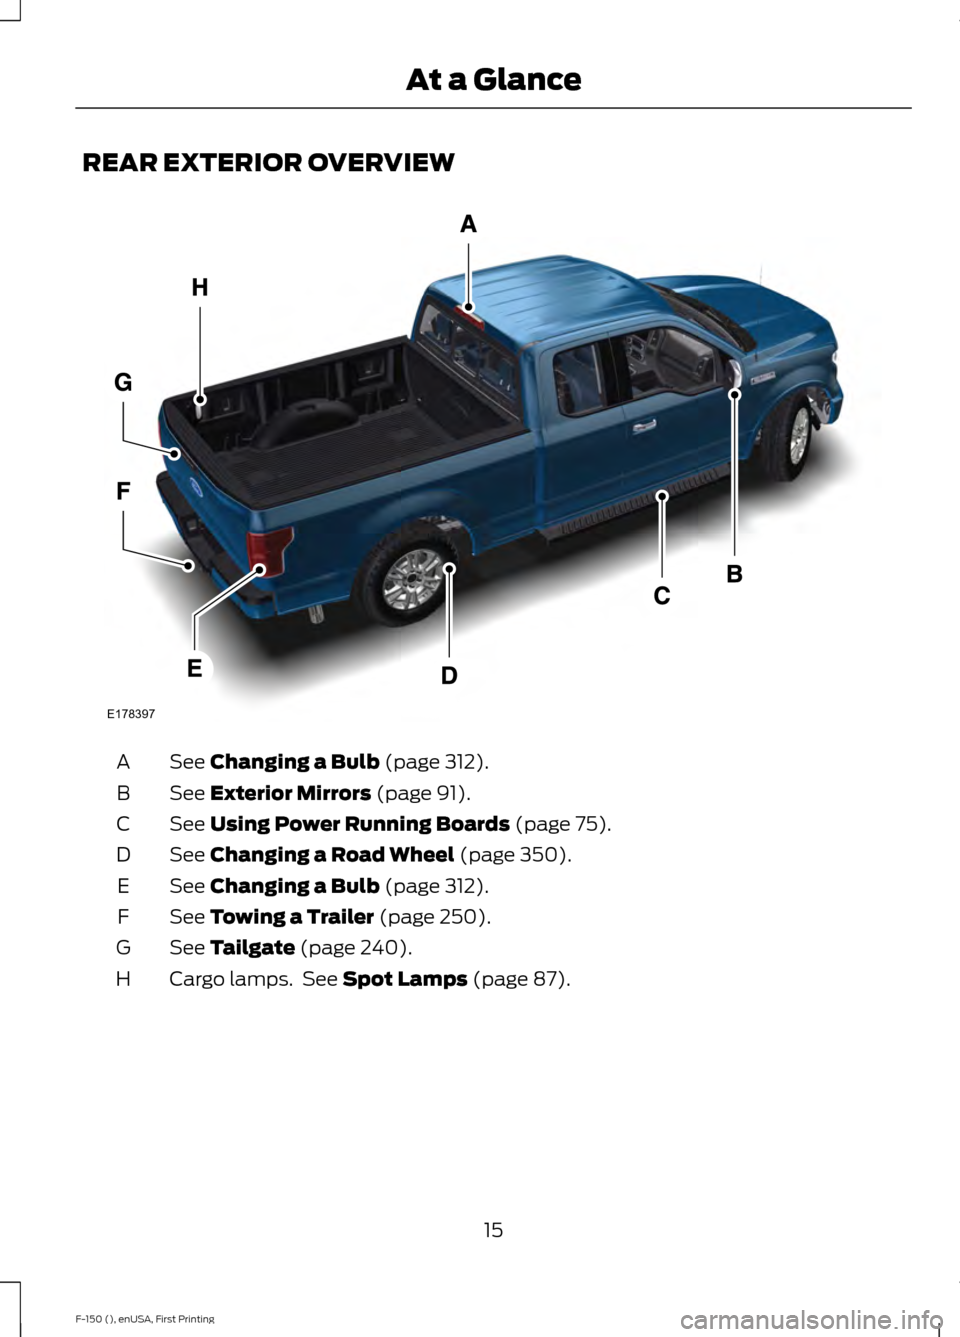 FORD F150 2015 13.G Owners Manual REAR EXTERIOR OVERVIEW
See Changing a Bulb (page 312).
A
See 
Exterior Mirrors (page 91).
B
See 
Using Power Running Boards (page 75).
C
See 
Changing a Road Wheel (page 350).
D
See 
Changing a Bulb (